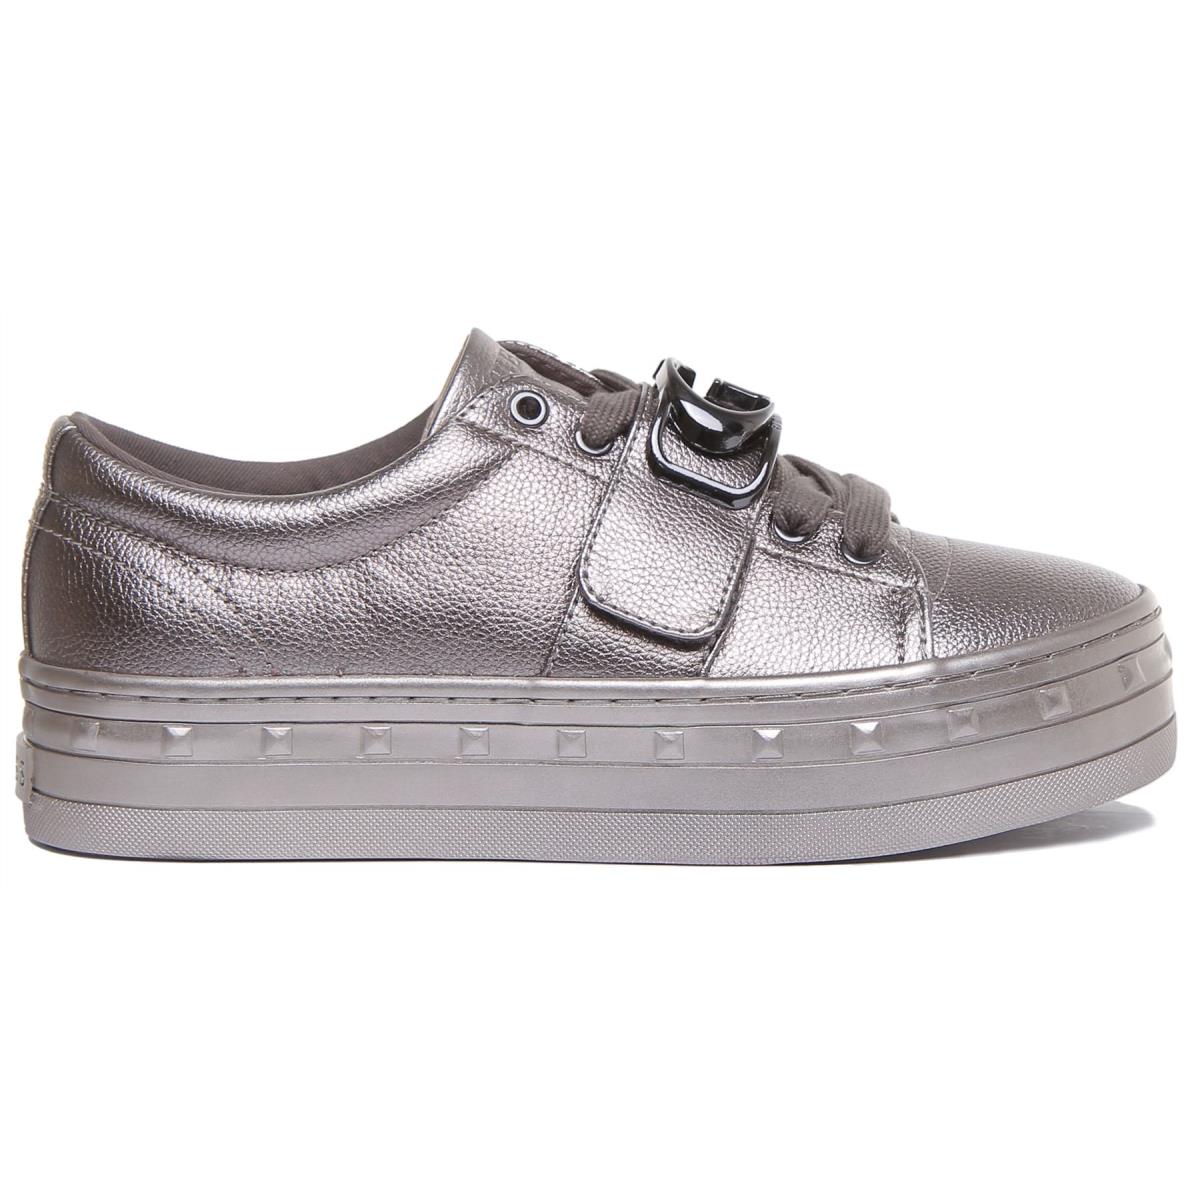 Guess Fl8Bliele12 In Grey Trainers Balit Active Lace Platform Size US 5 - 11